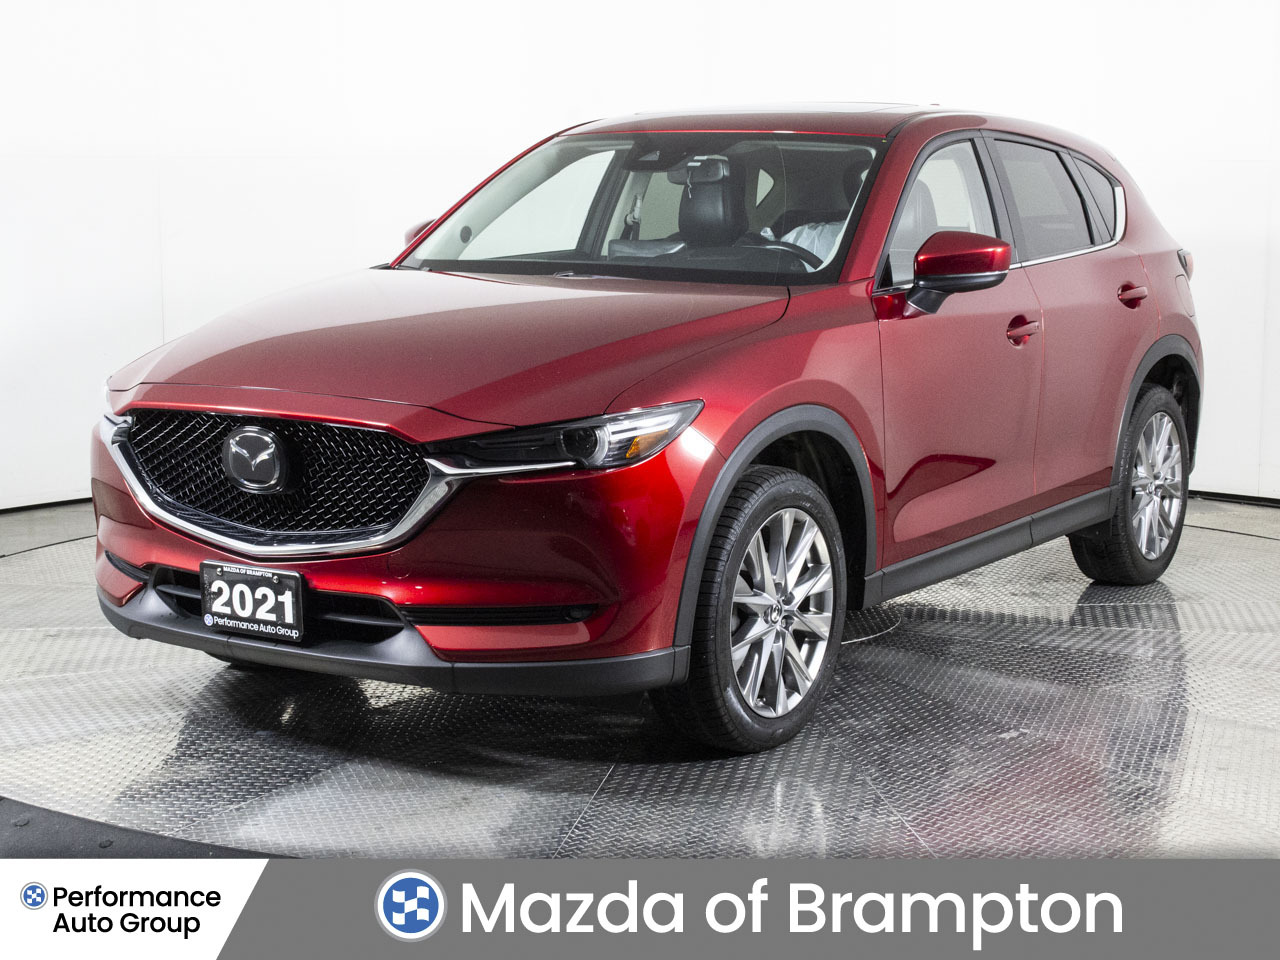 2021 Mazda CX-5 2021.5 GT AWD LOADED LEATHER SUNROOF NAV 1 OWNER